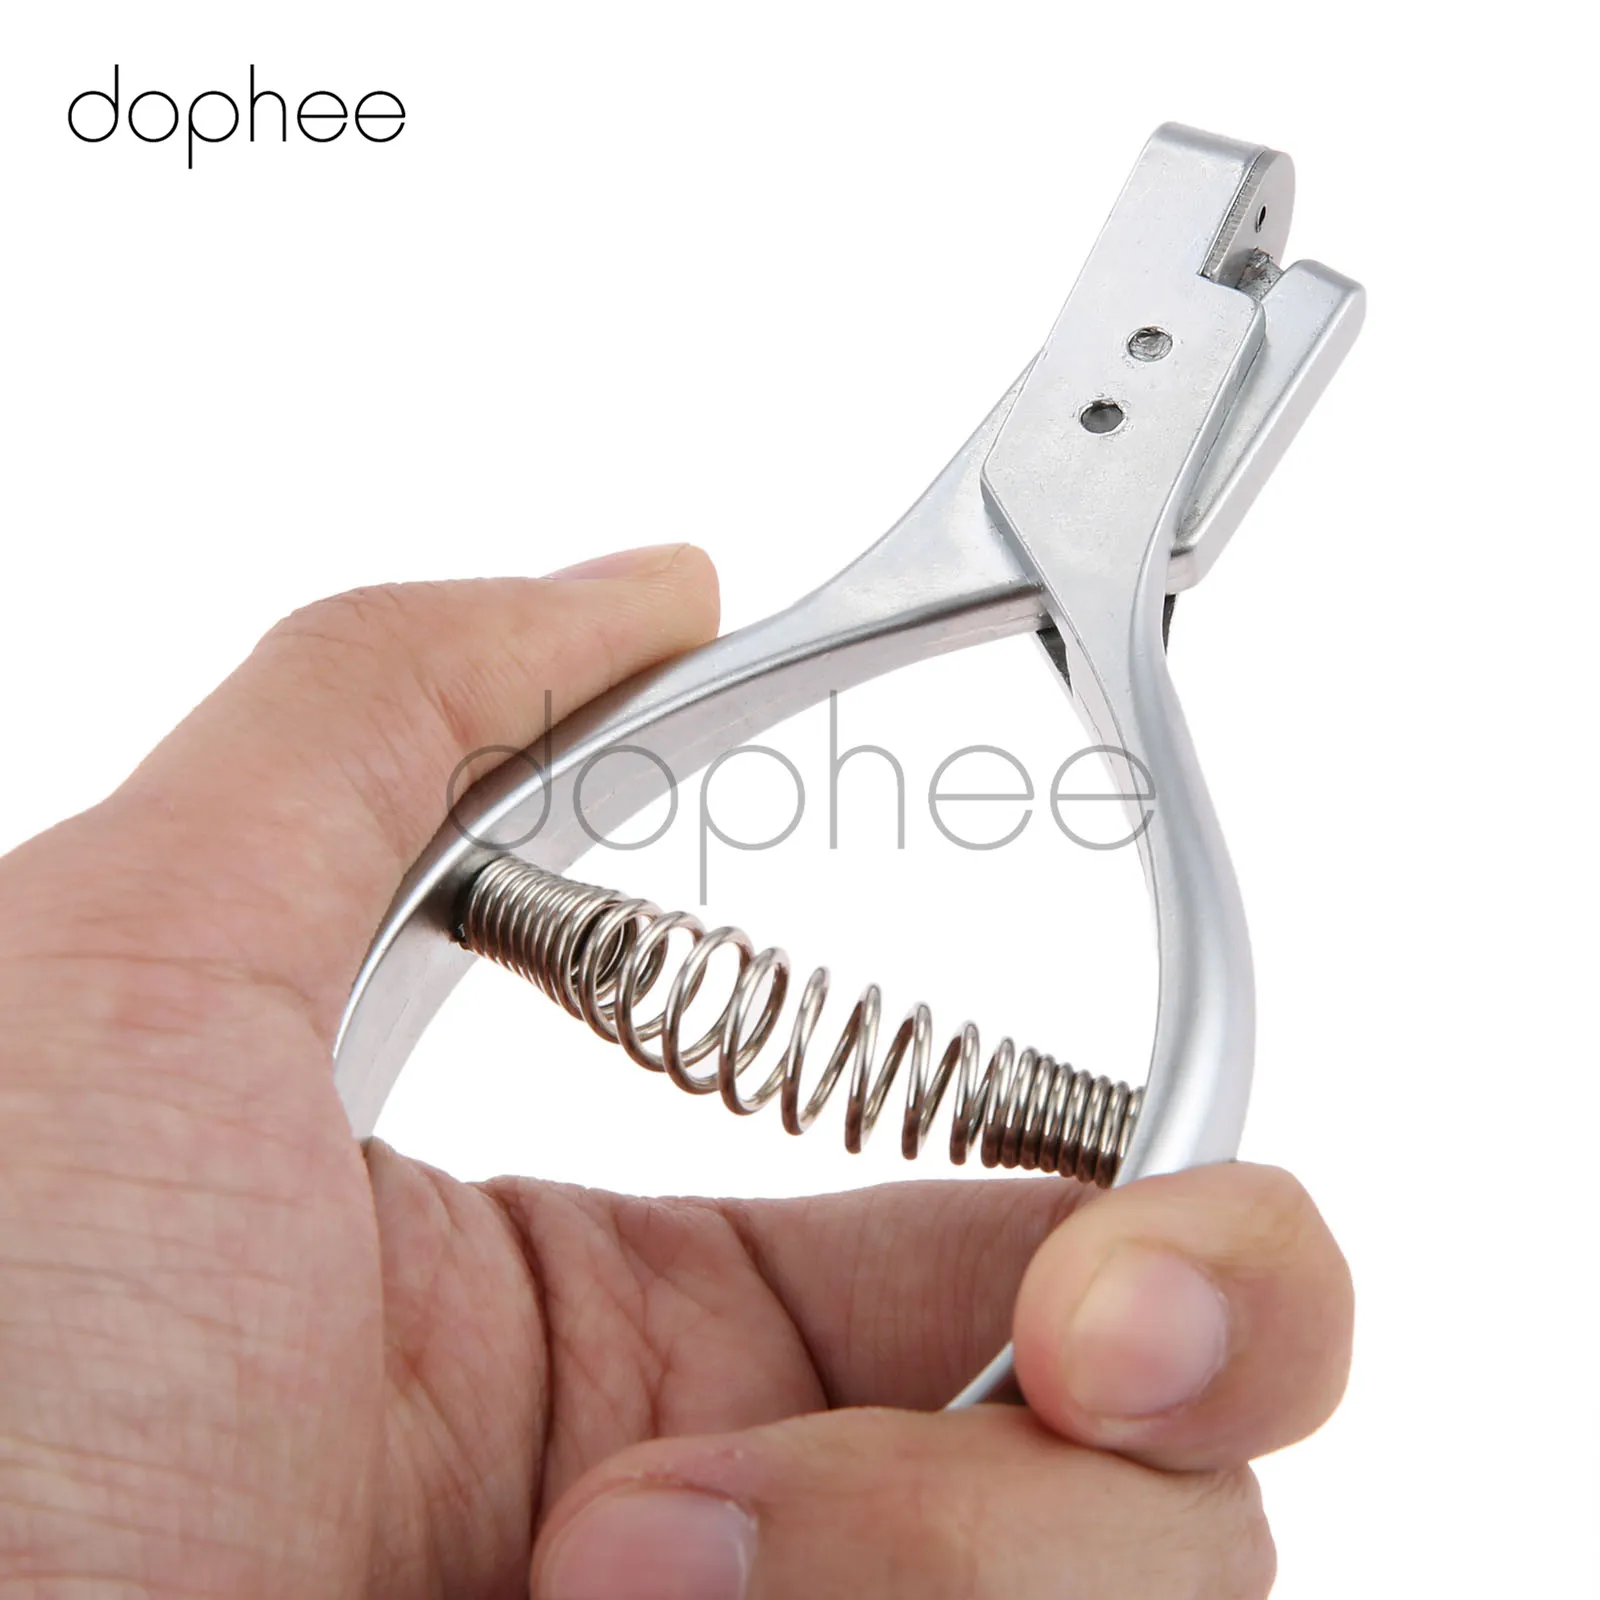 

dophee 1pcs U-Shaped Rolled Steel Garment Pattern Notcher Proofing Plier Sewing Cutting Marker For Garment Production